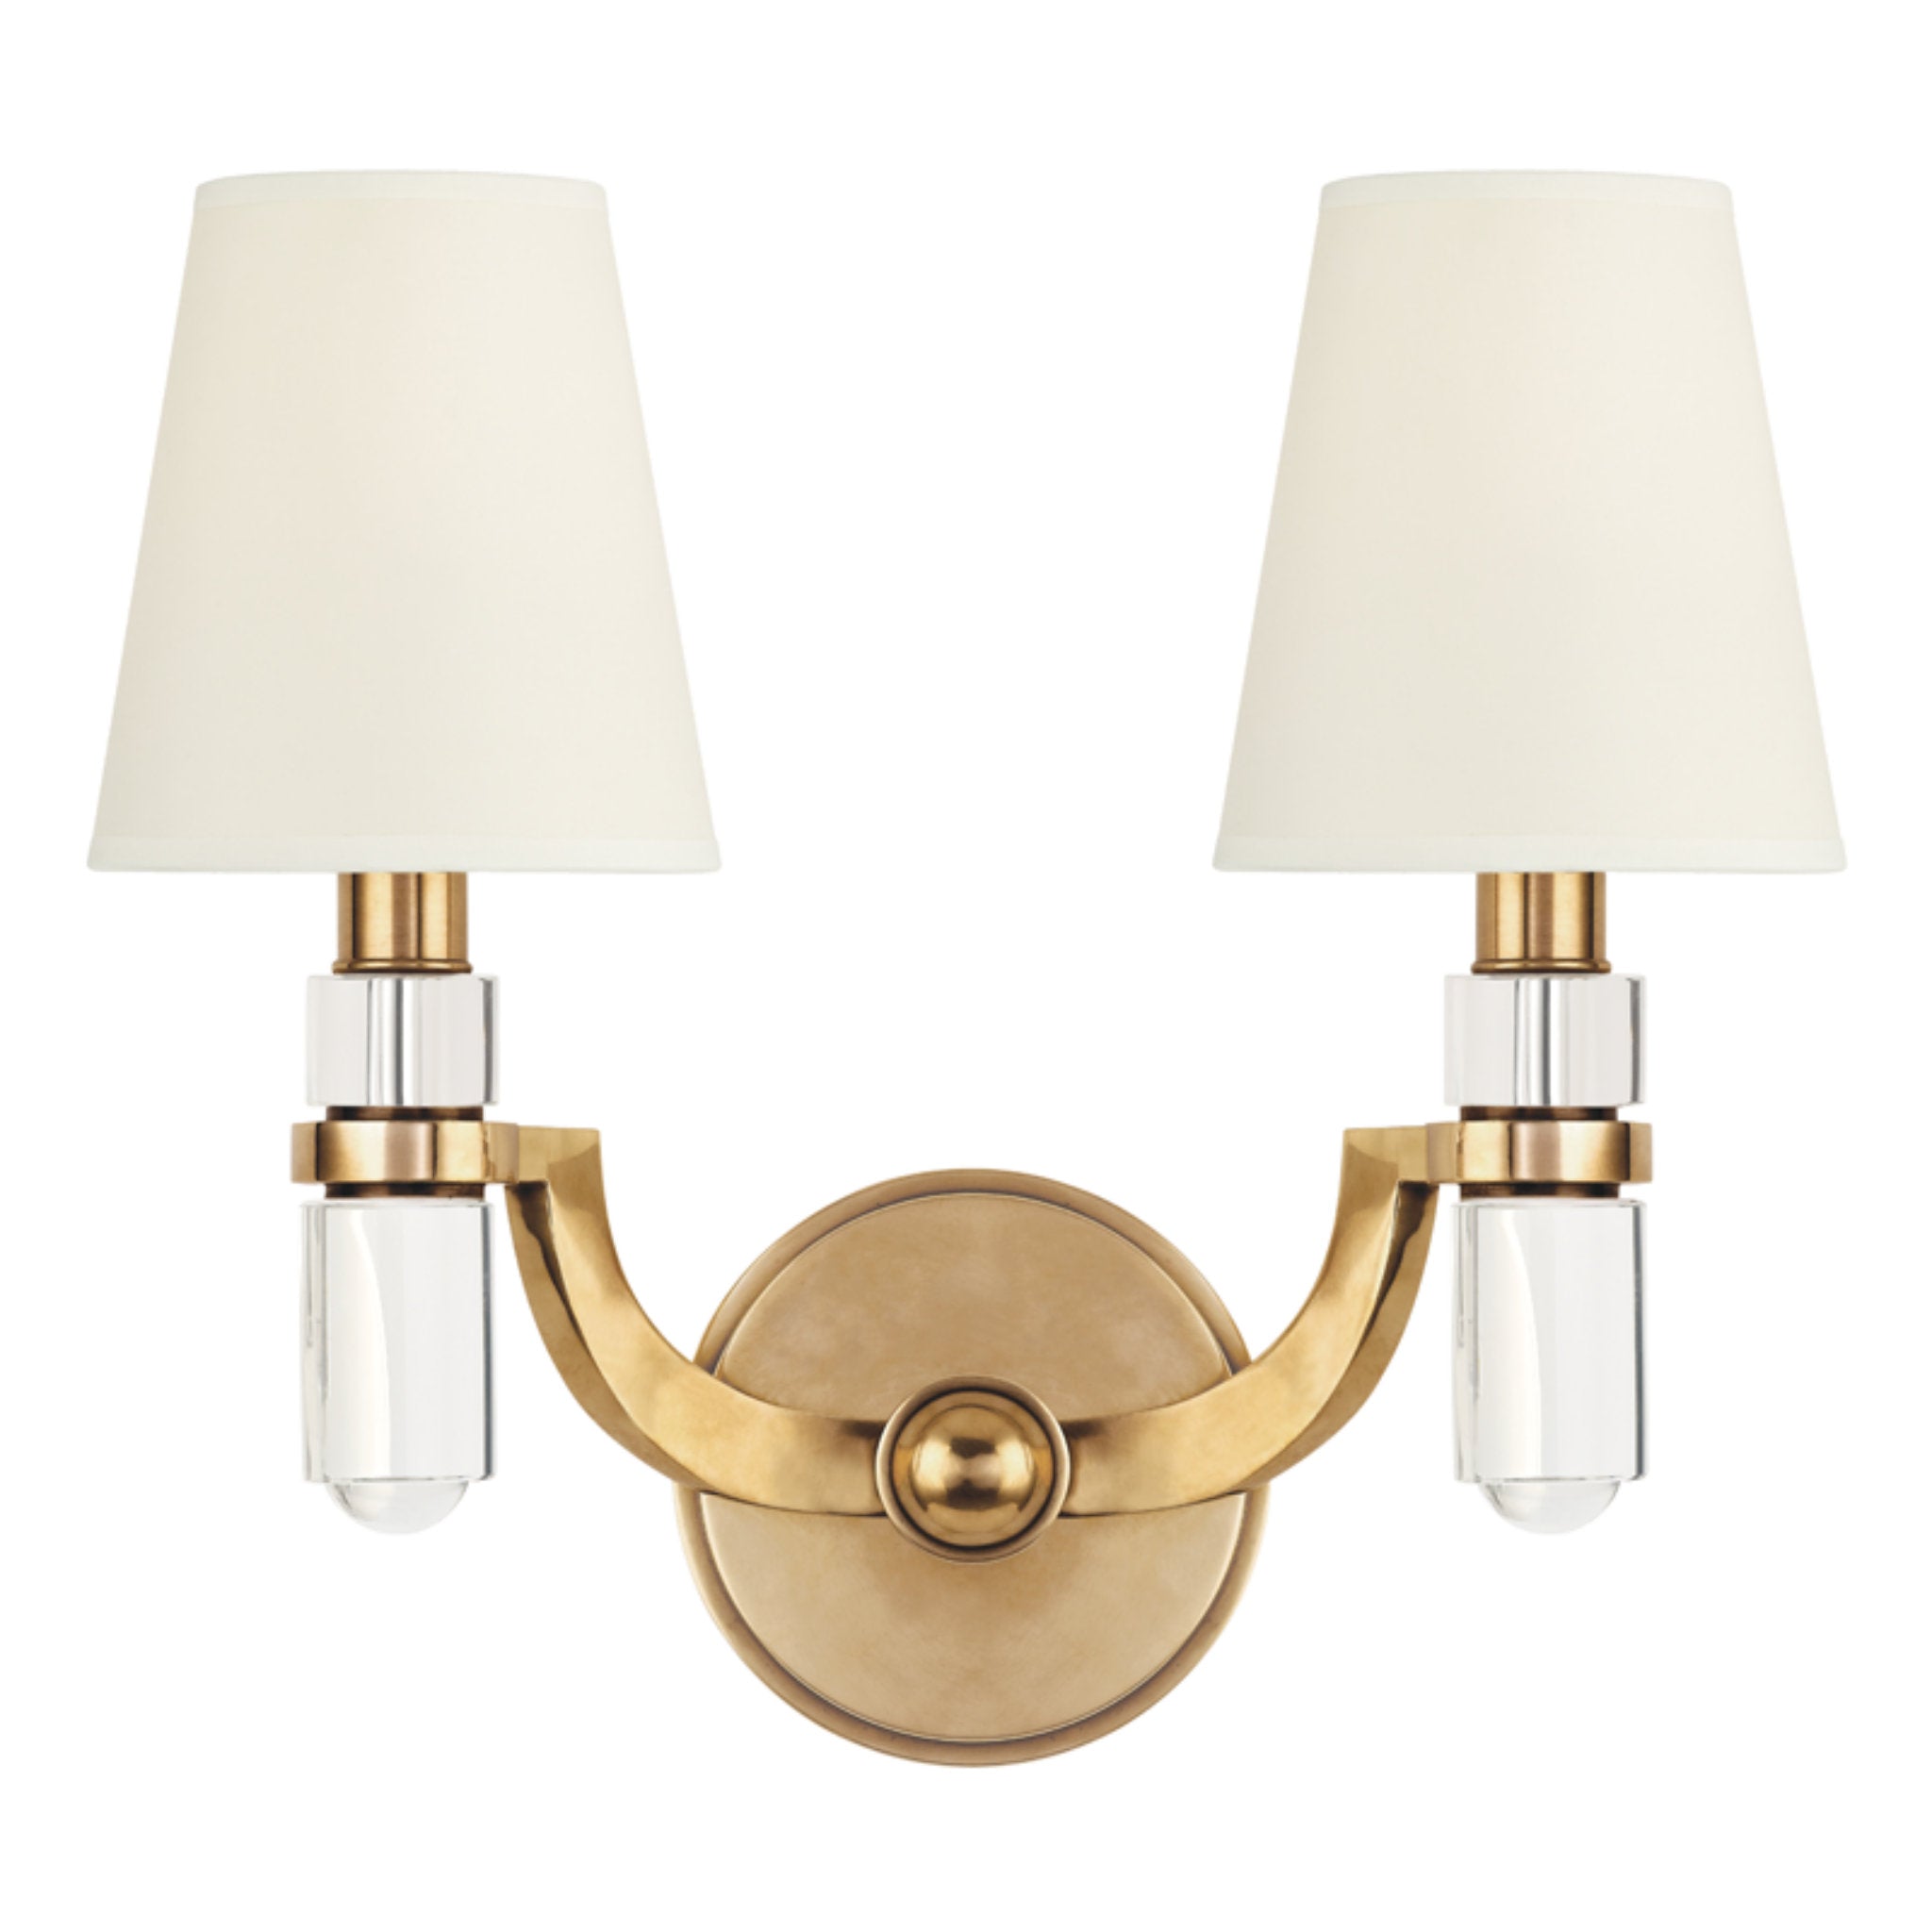 Dayton 2 Light Wall Sconce in Aged Brass